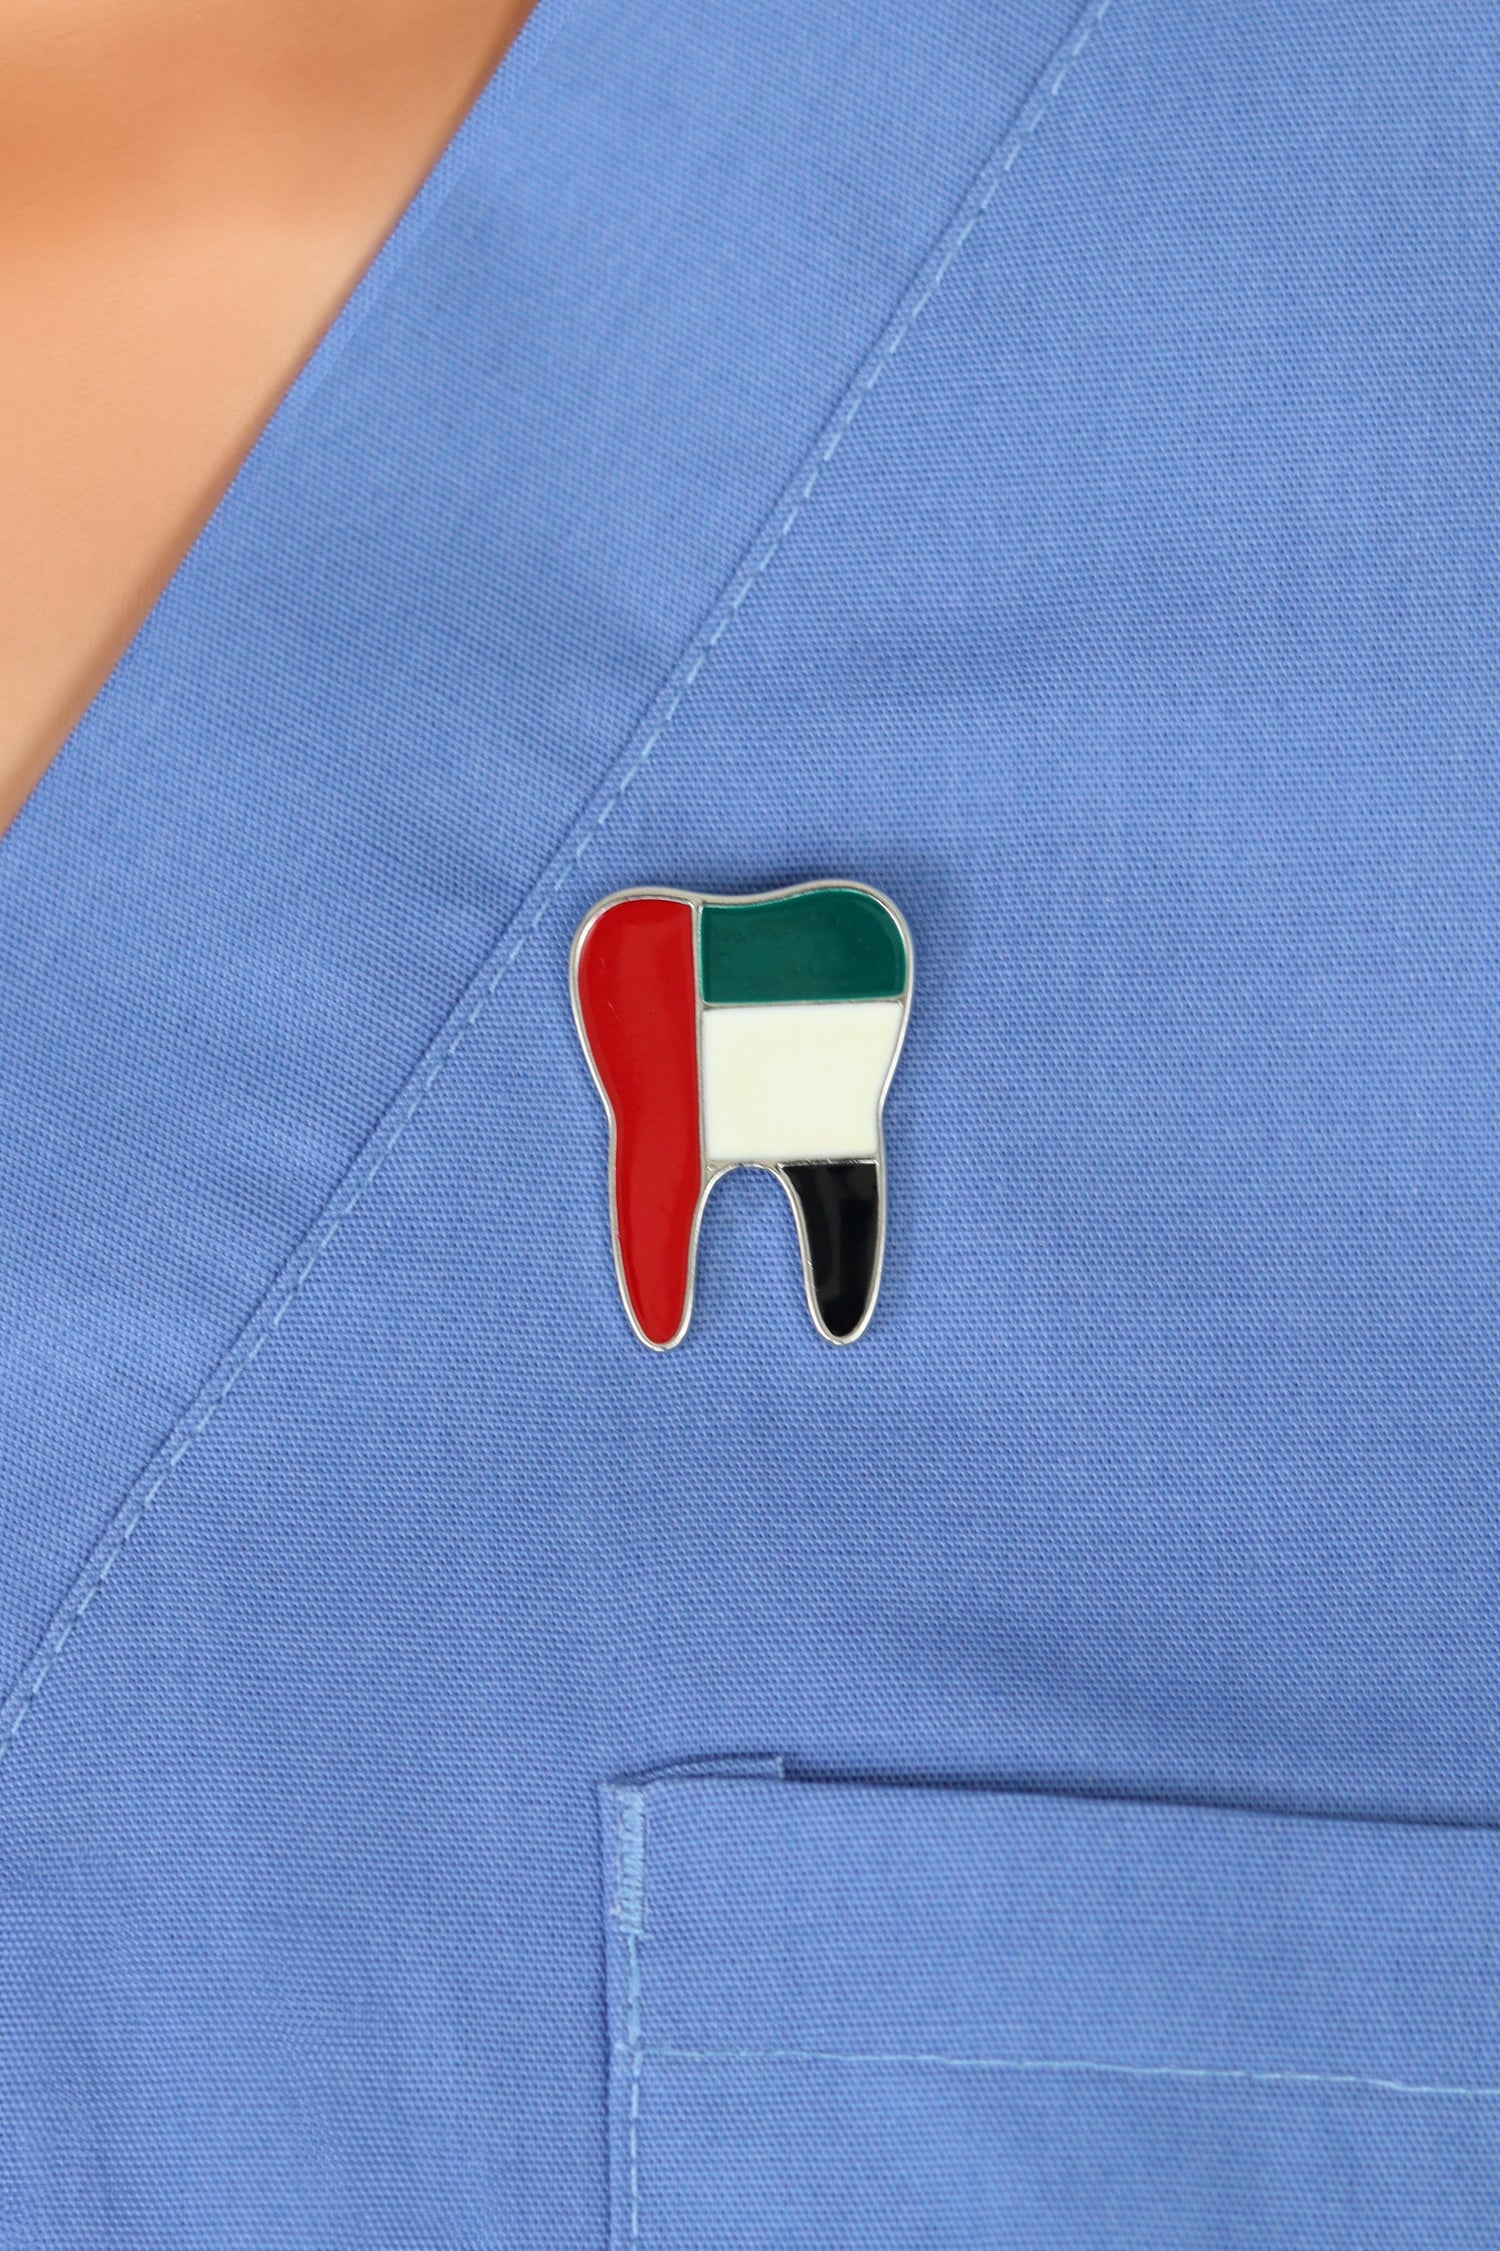 Tooth Pin on Country Flag for Dentist